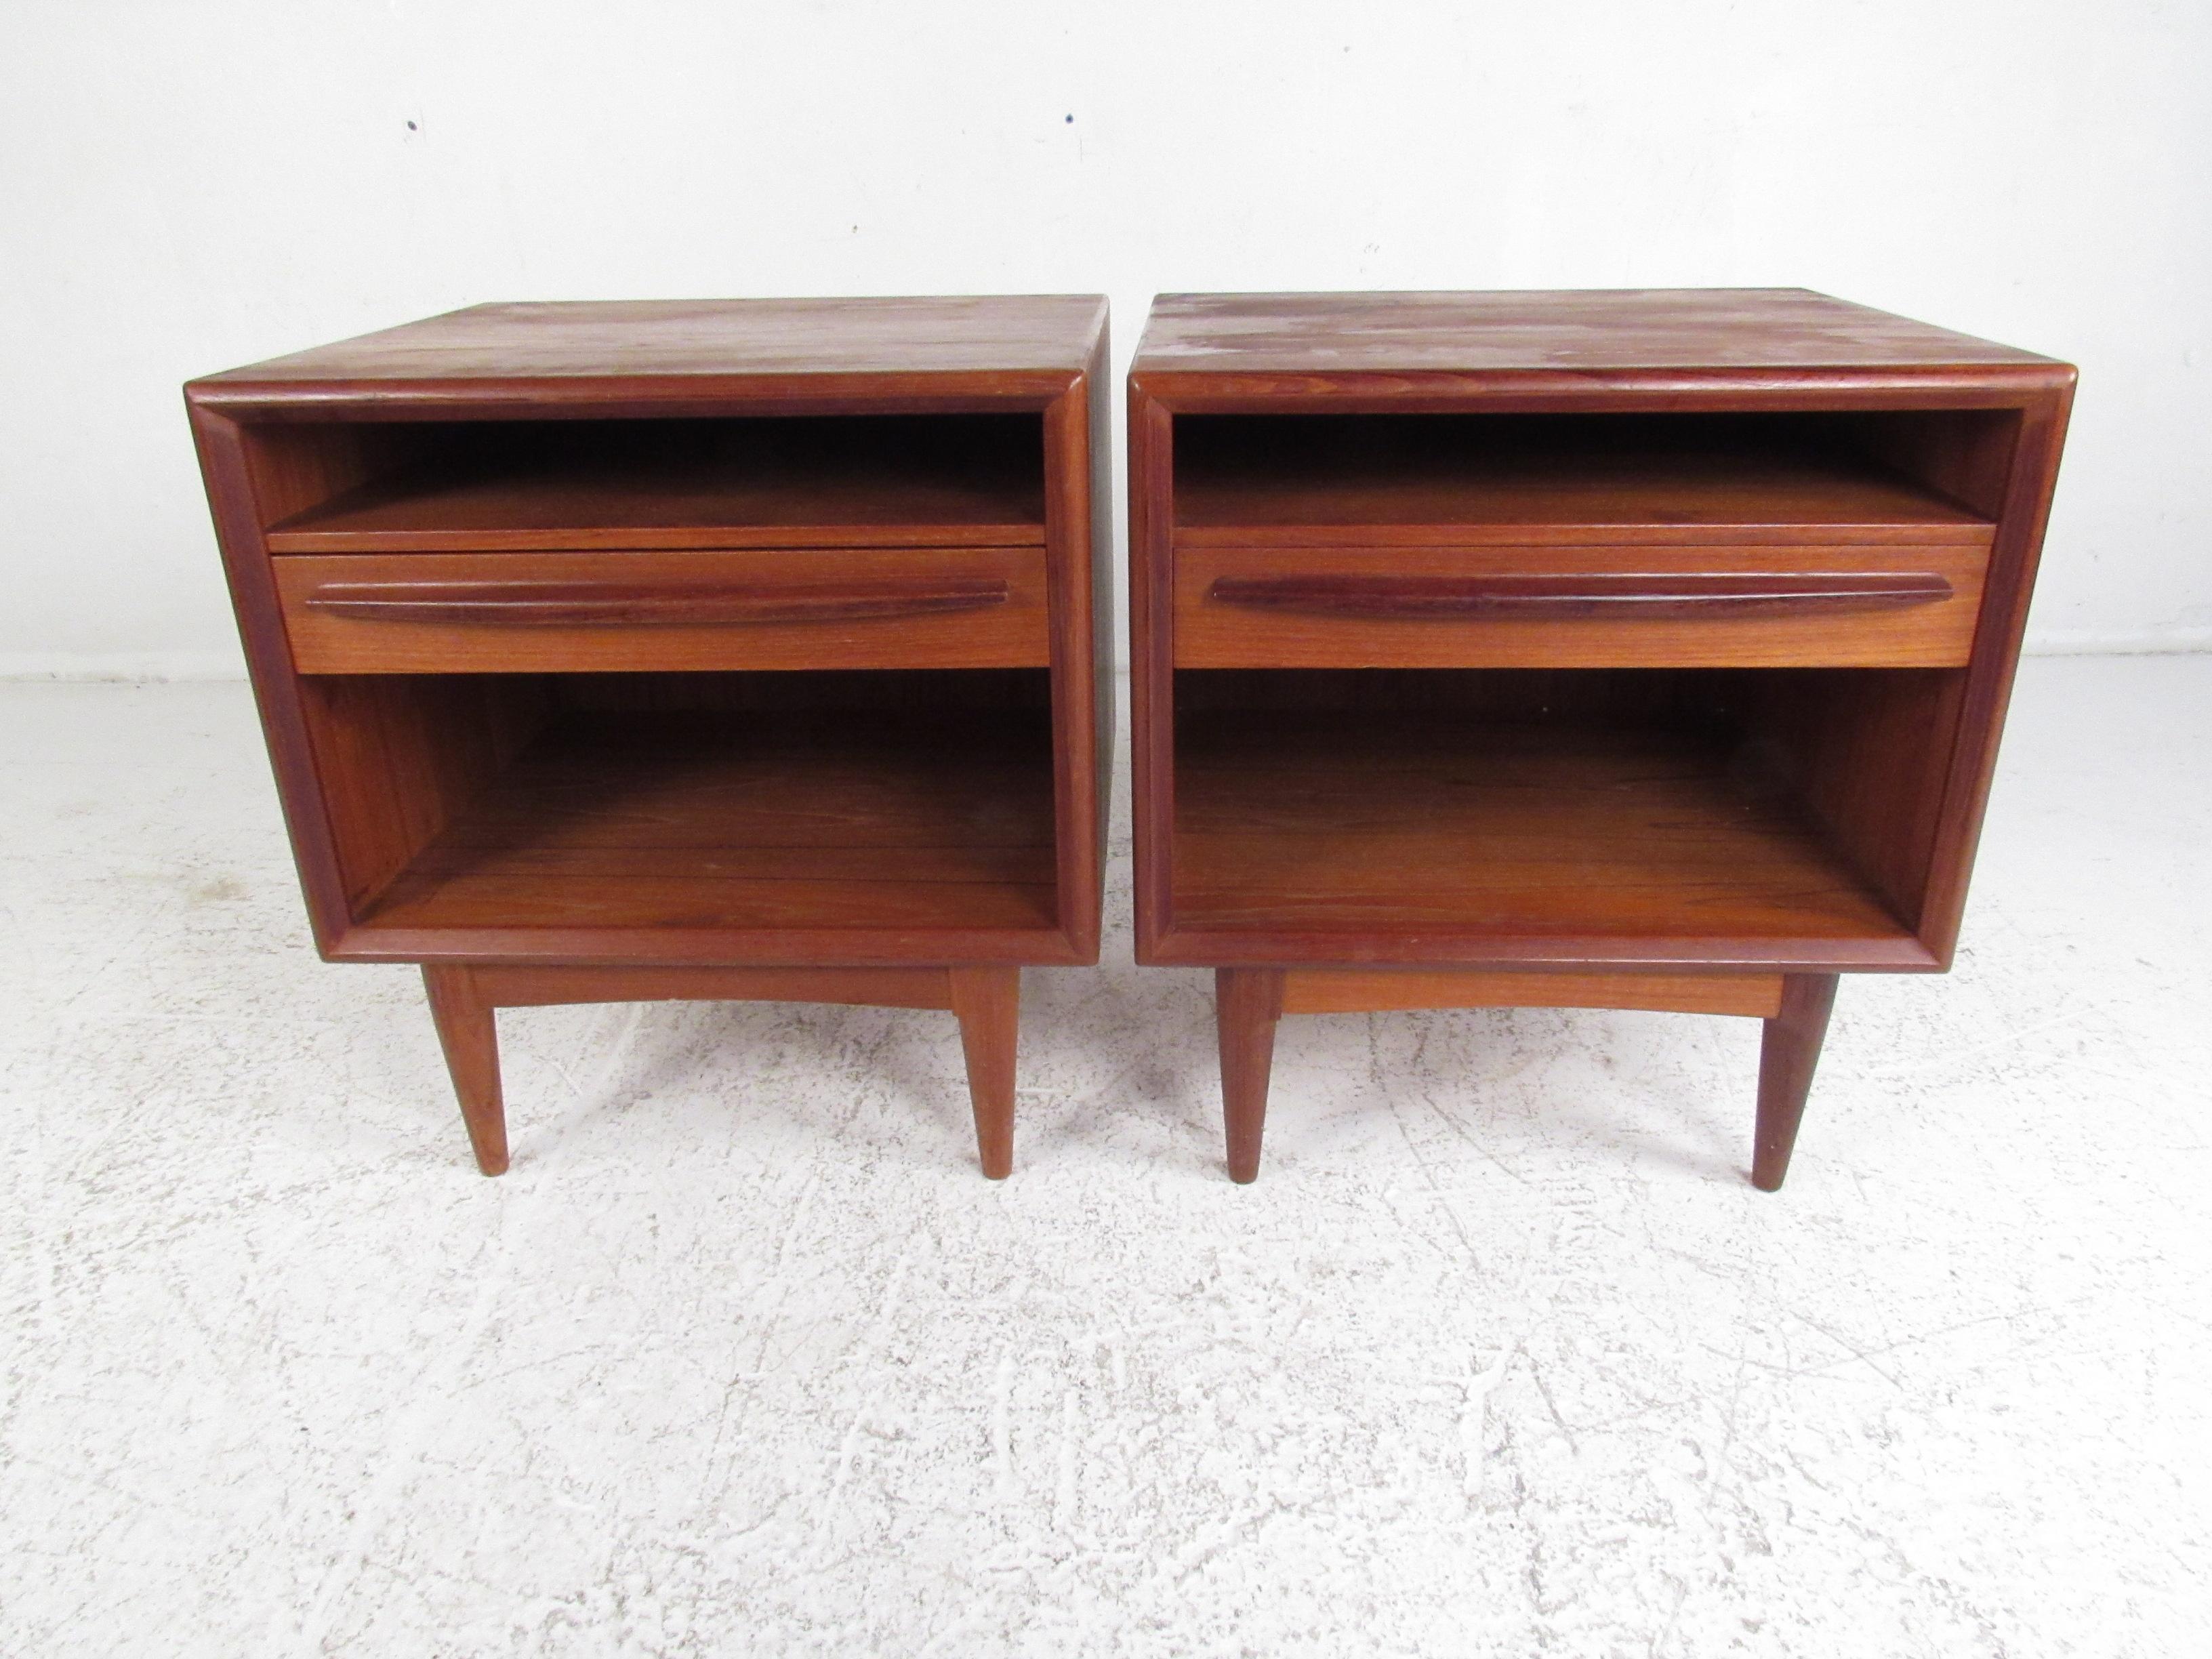 This beautiful pair of vintage modern nightstands feature one drawer and two open compartments for storage. A unique design with a sculpted horizontal drawer pull, a finished back, and tapered legs. This Danish teak pair of end tables make the